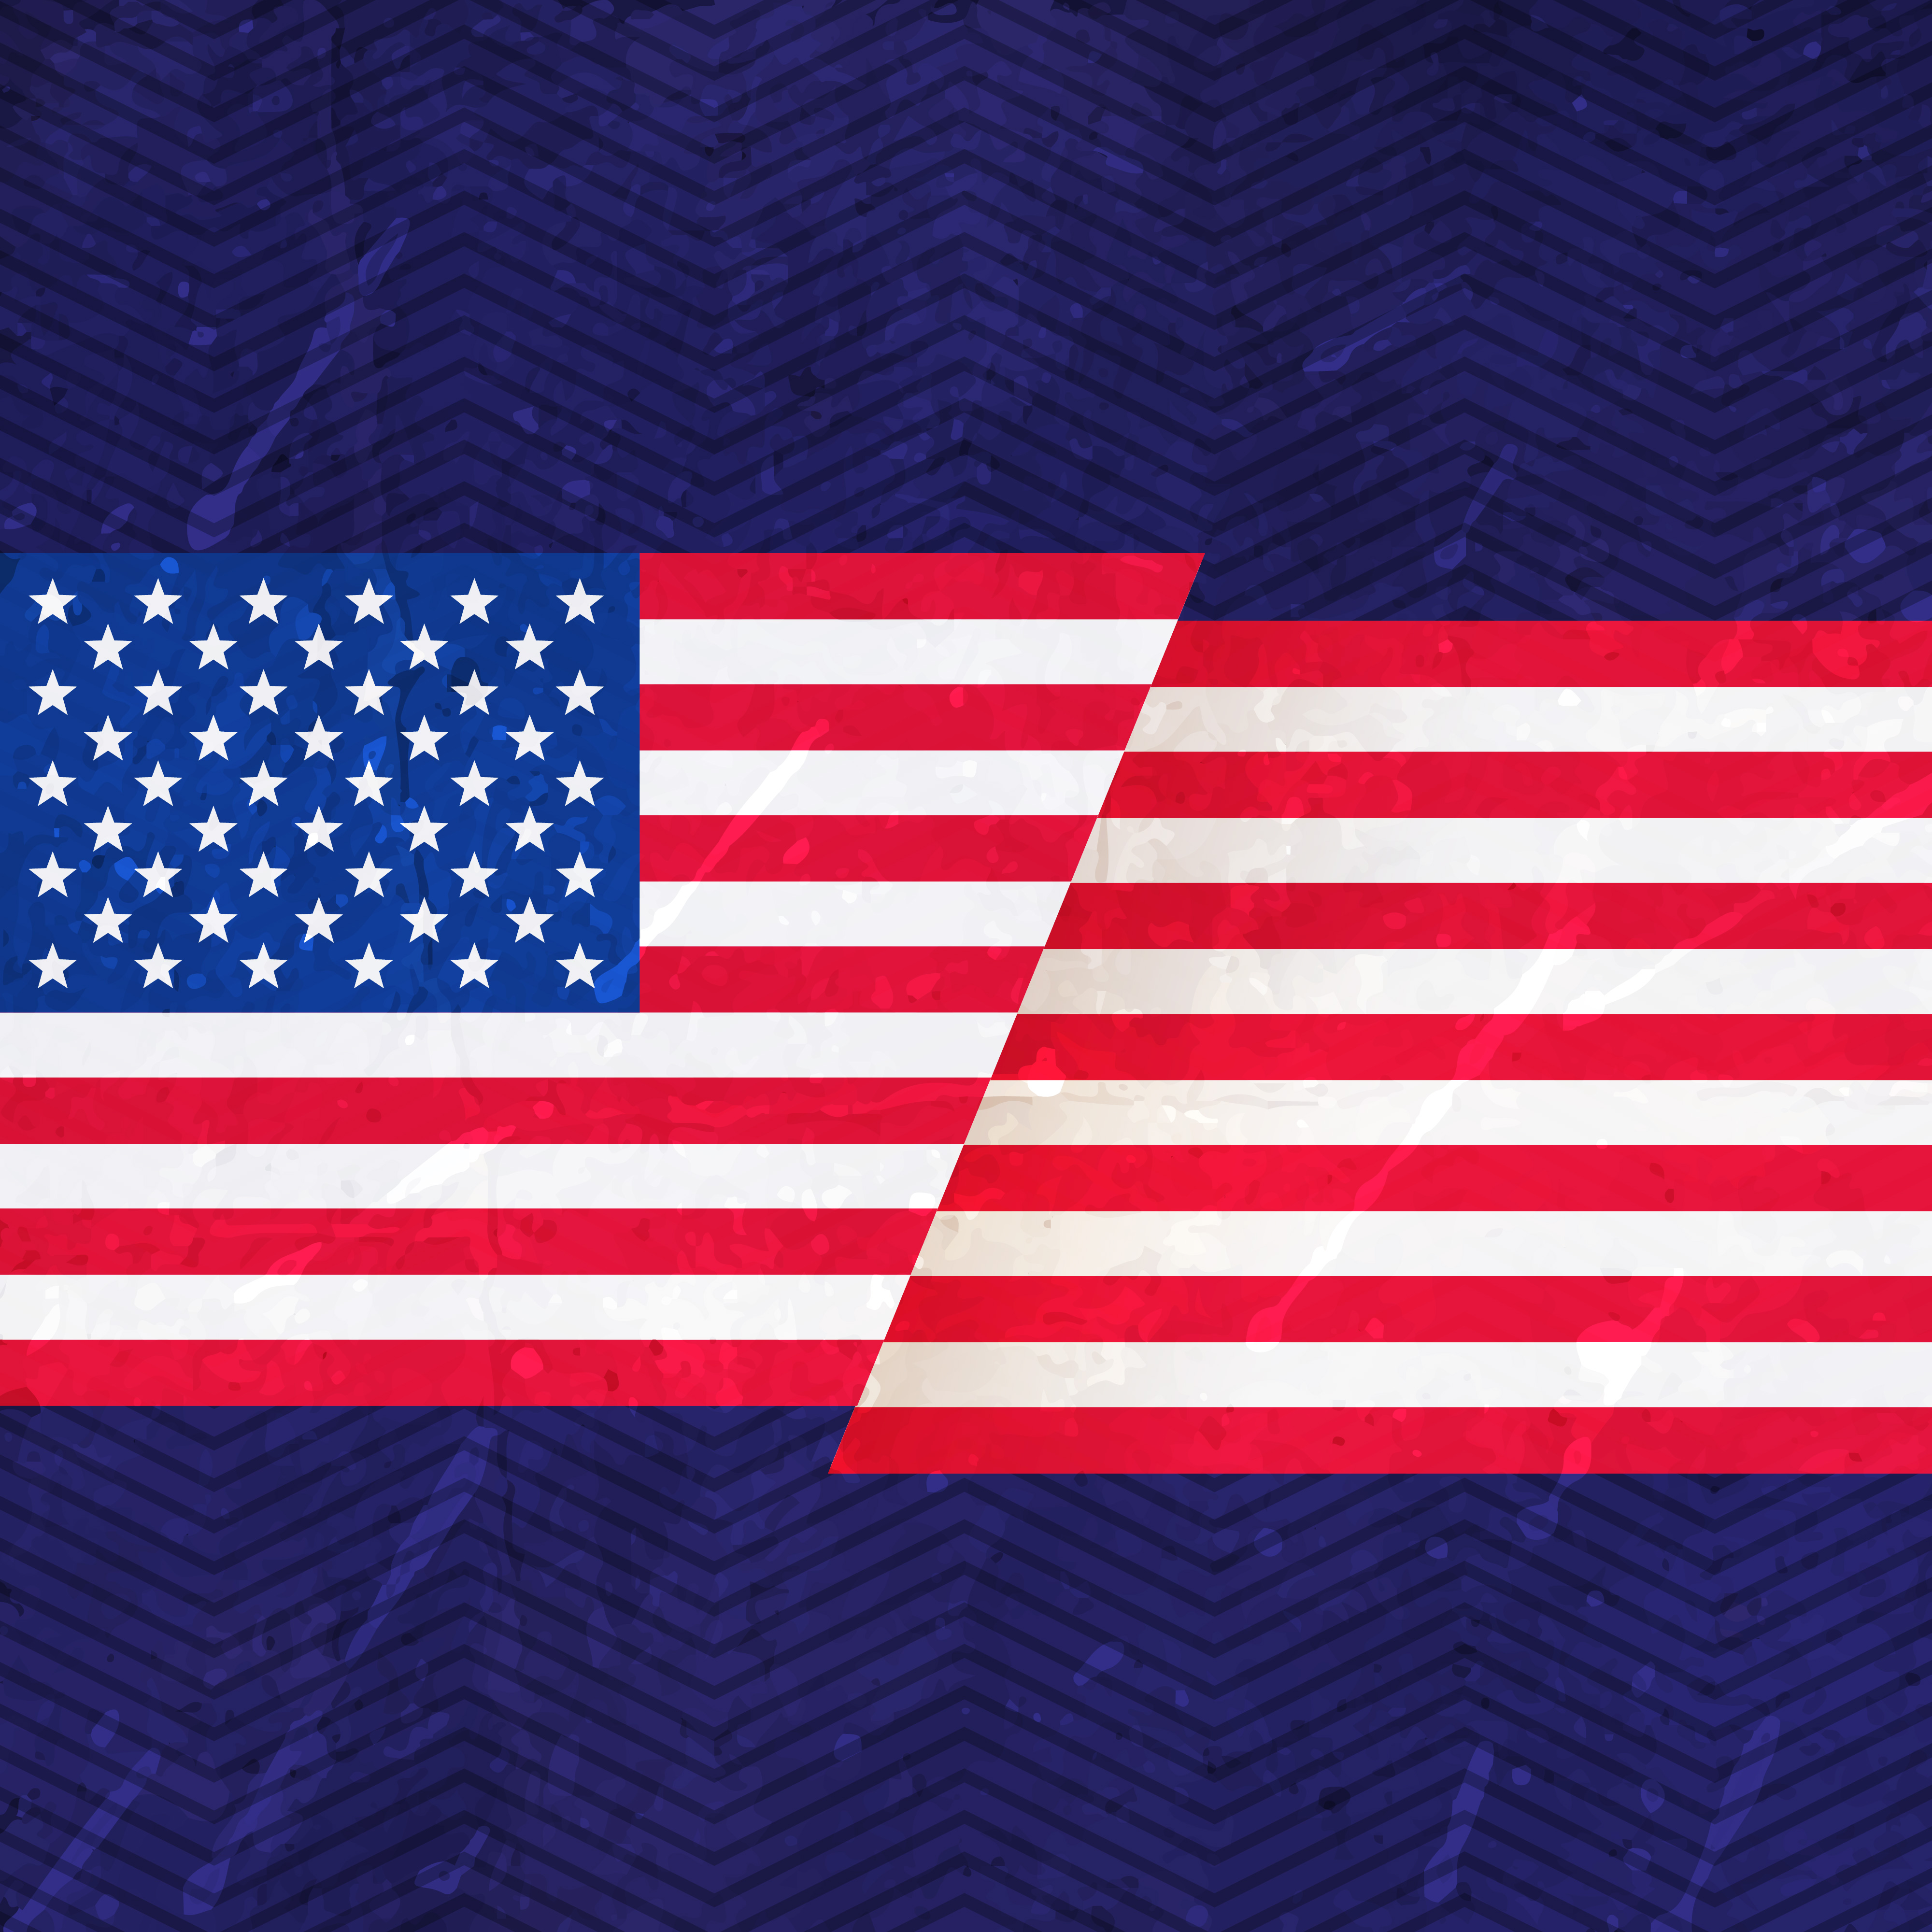 Download United States Flag Free Vector Art - (3261 Free Downloads)